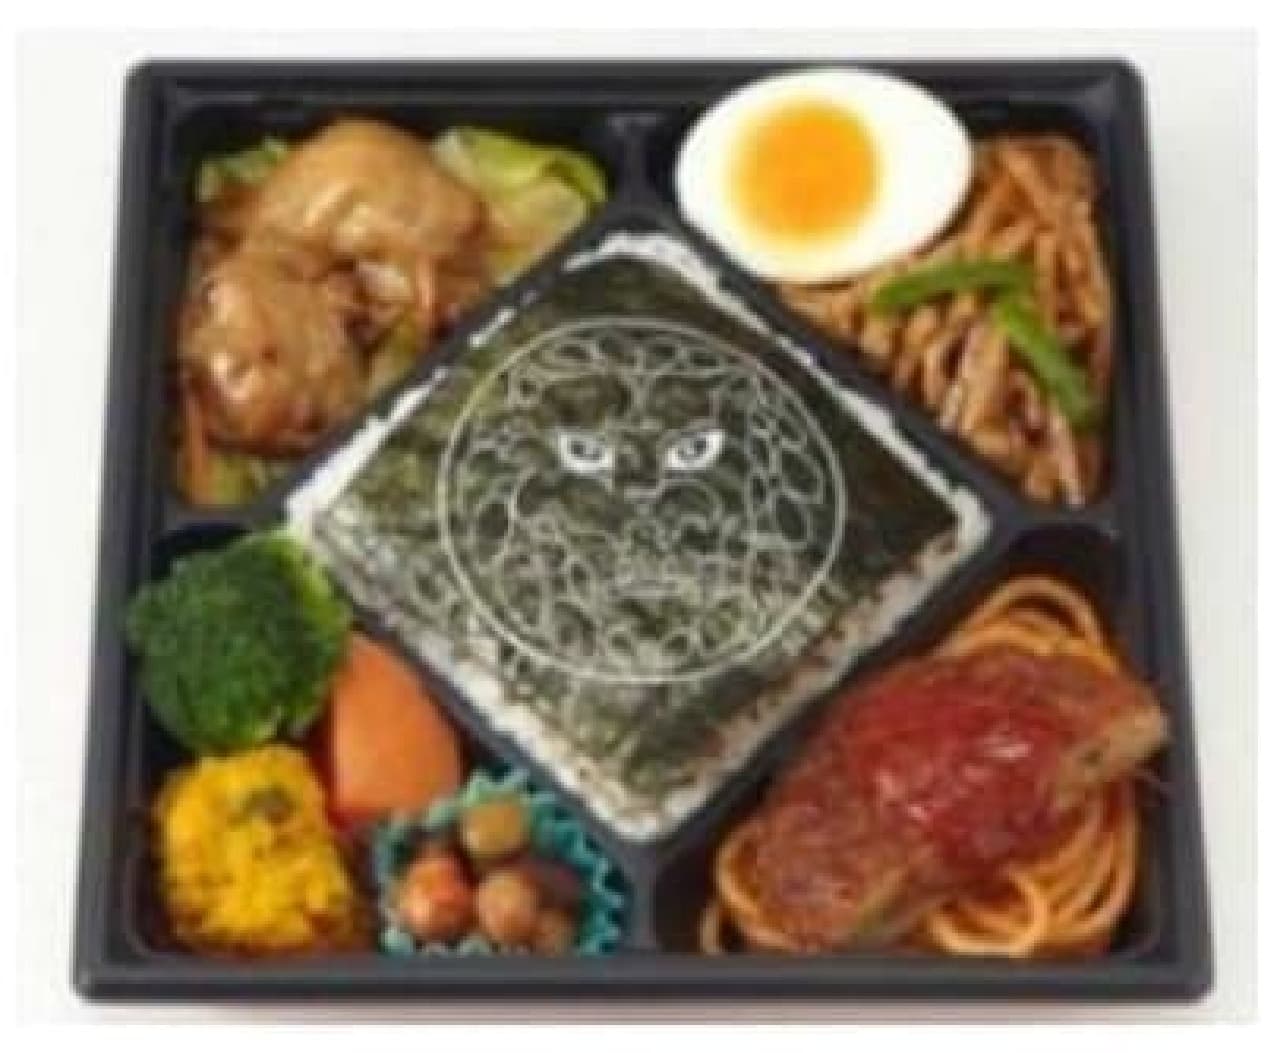 Tanahashi's "One in 100 Years Special Lunch Box"